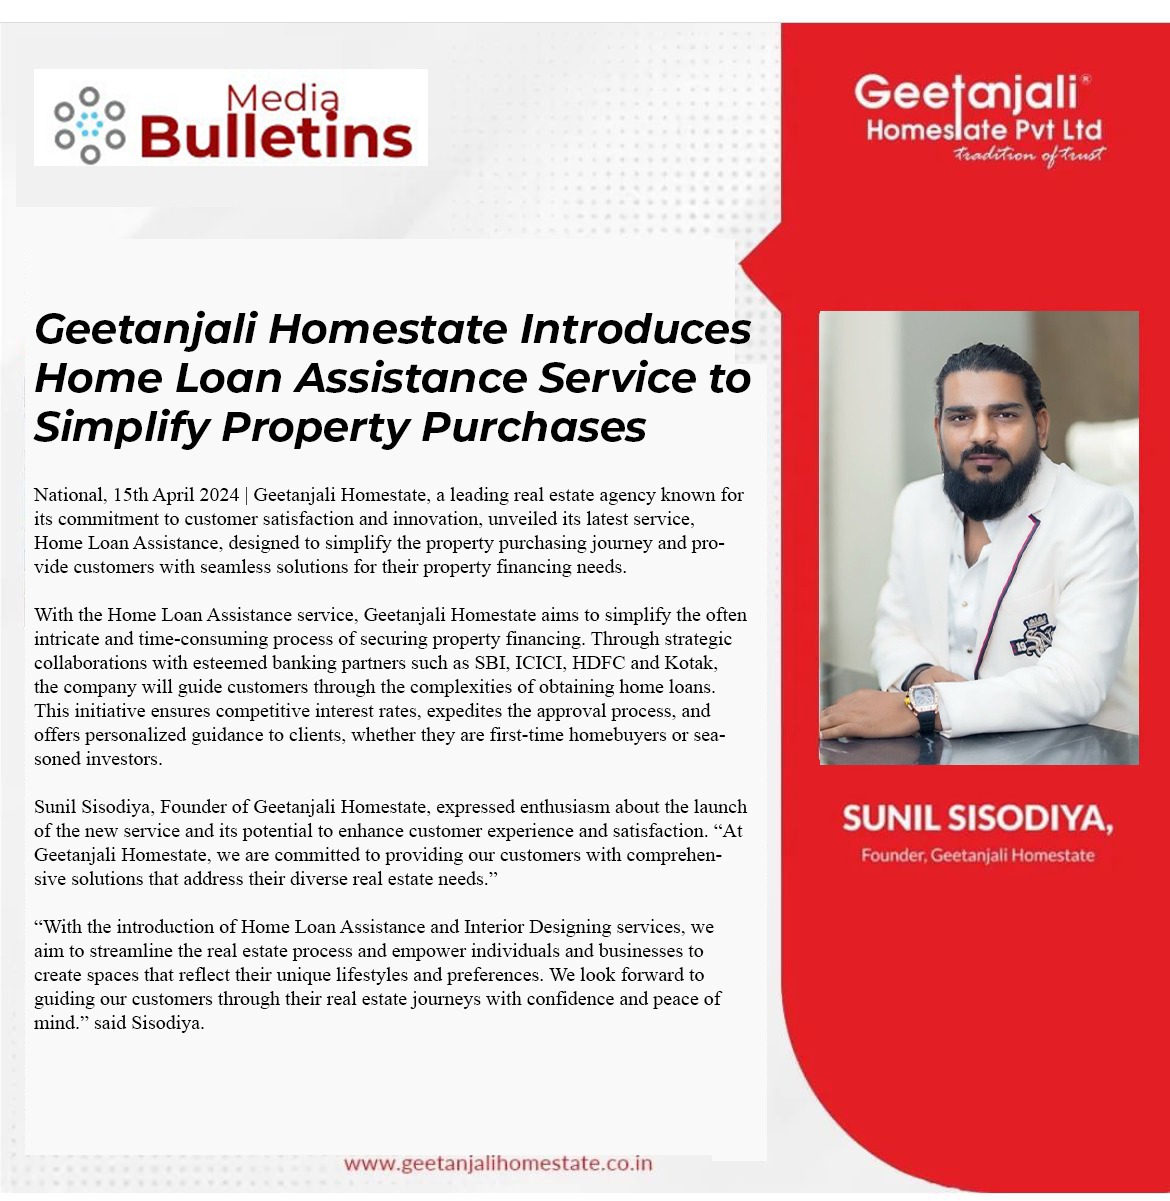 Geetanjali Homestate Introduces Home Loan Assistance Service to Simplify Property Purchases